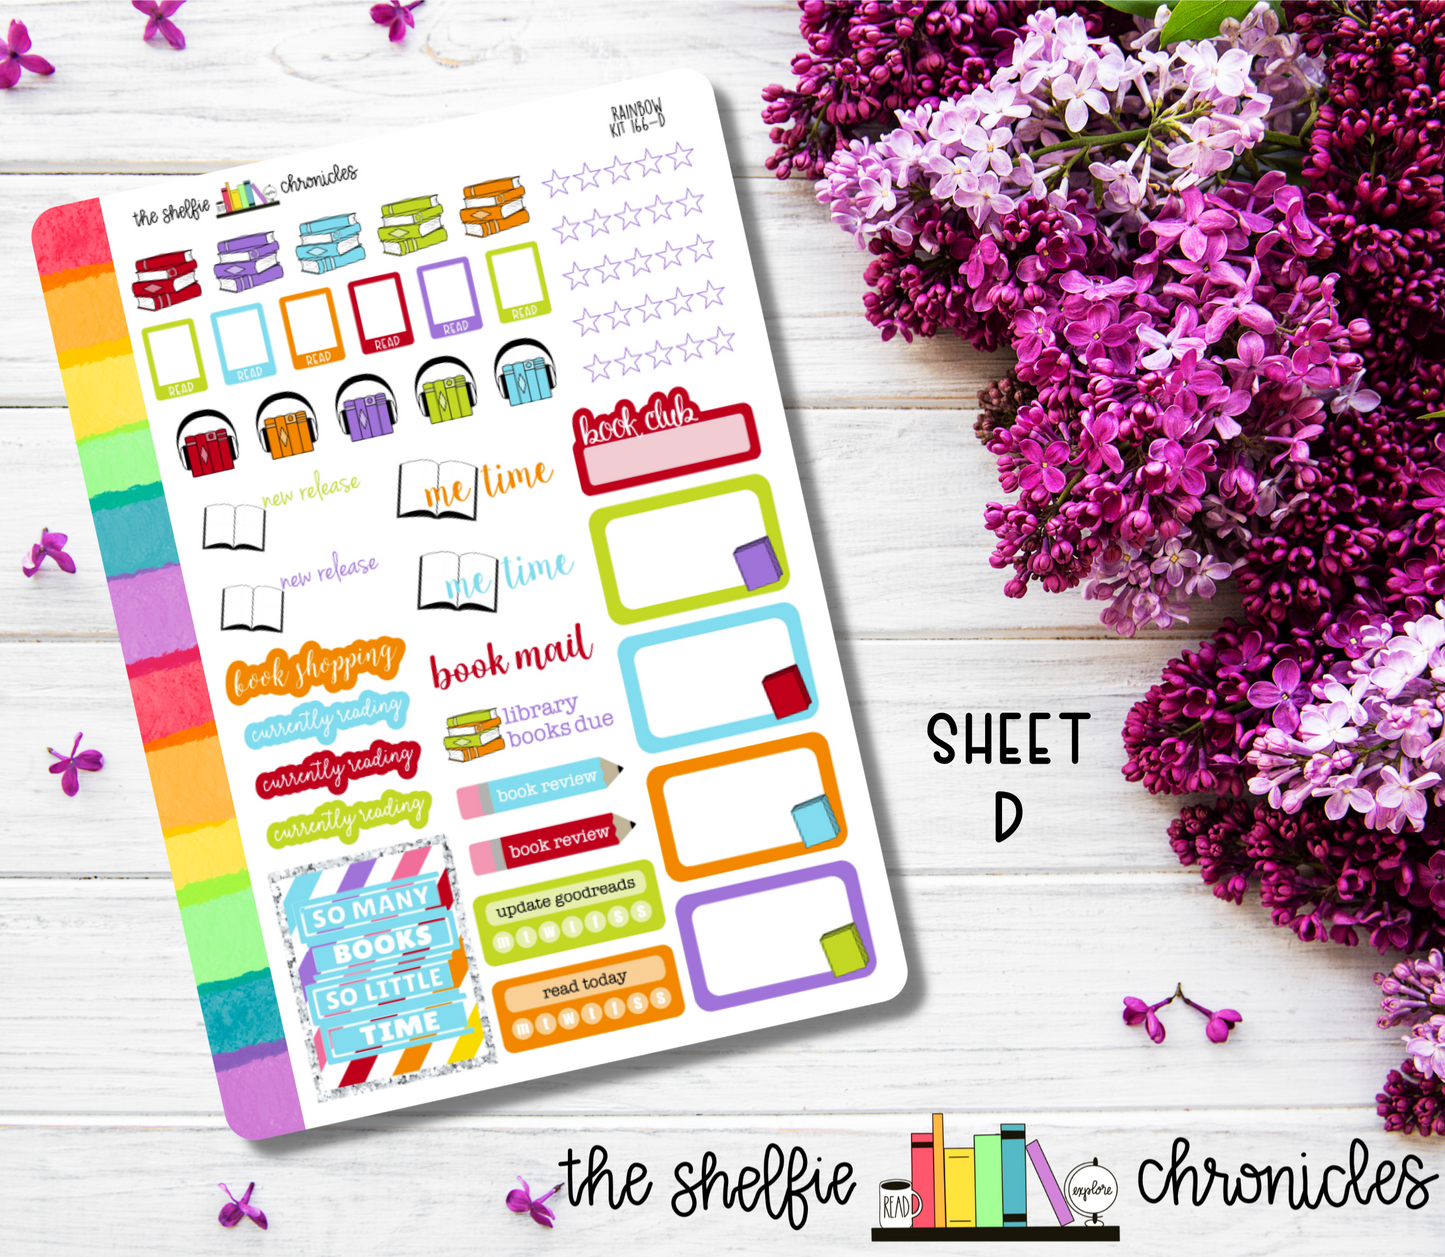 Kit 166 - Rainbow Weekly Kit - Die Cut Stickers - Repositionable Paper - Made To Fit 7x9 Planners